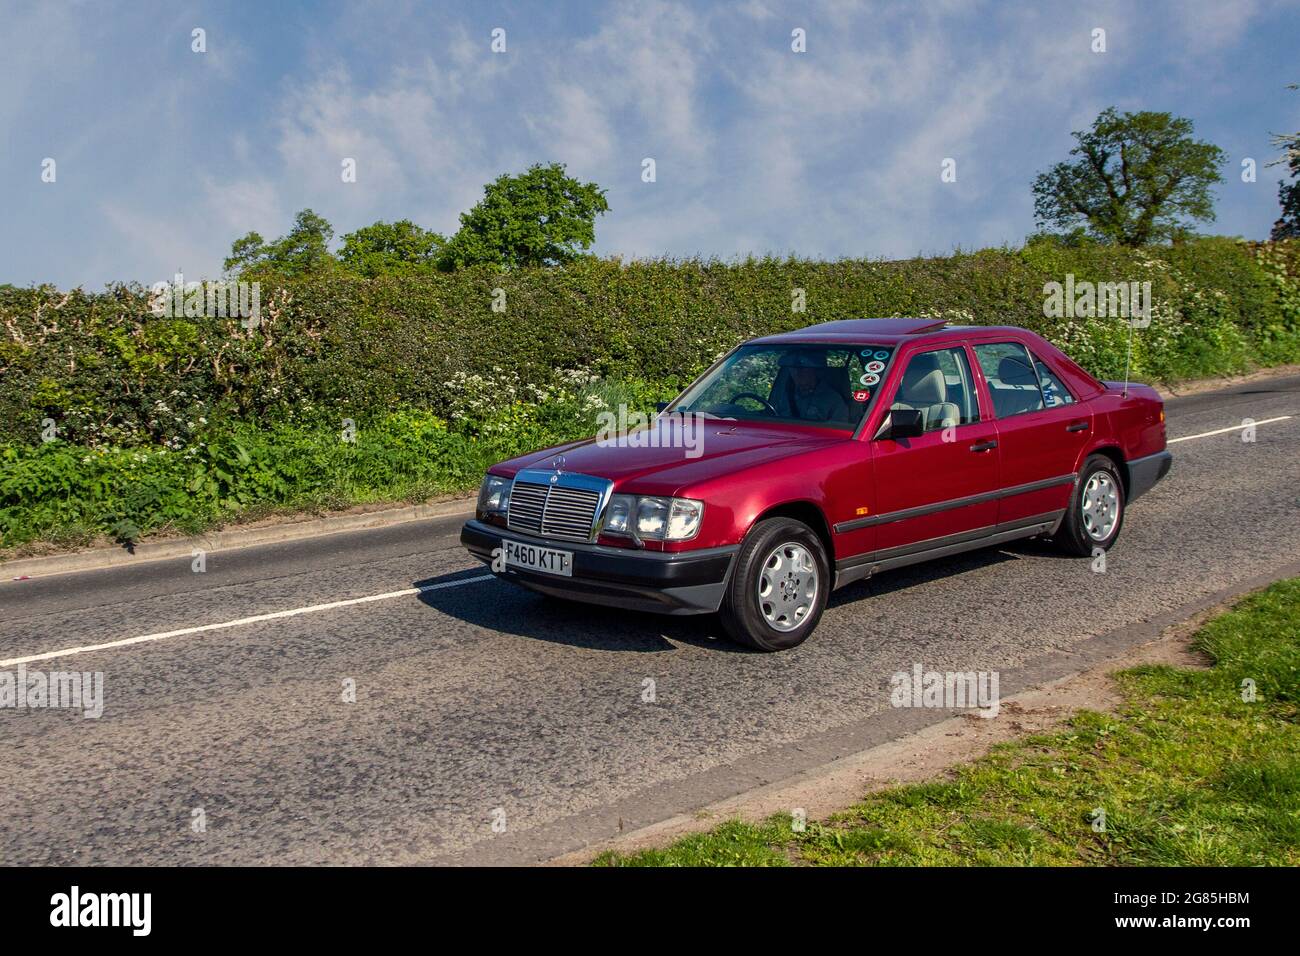 1989 80s Mercedes Benz 260 E Auto 2599cc petrol saloon en-route to Capesthorne Hall classic May car show, Cheshire, UK Stock Photo